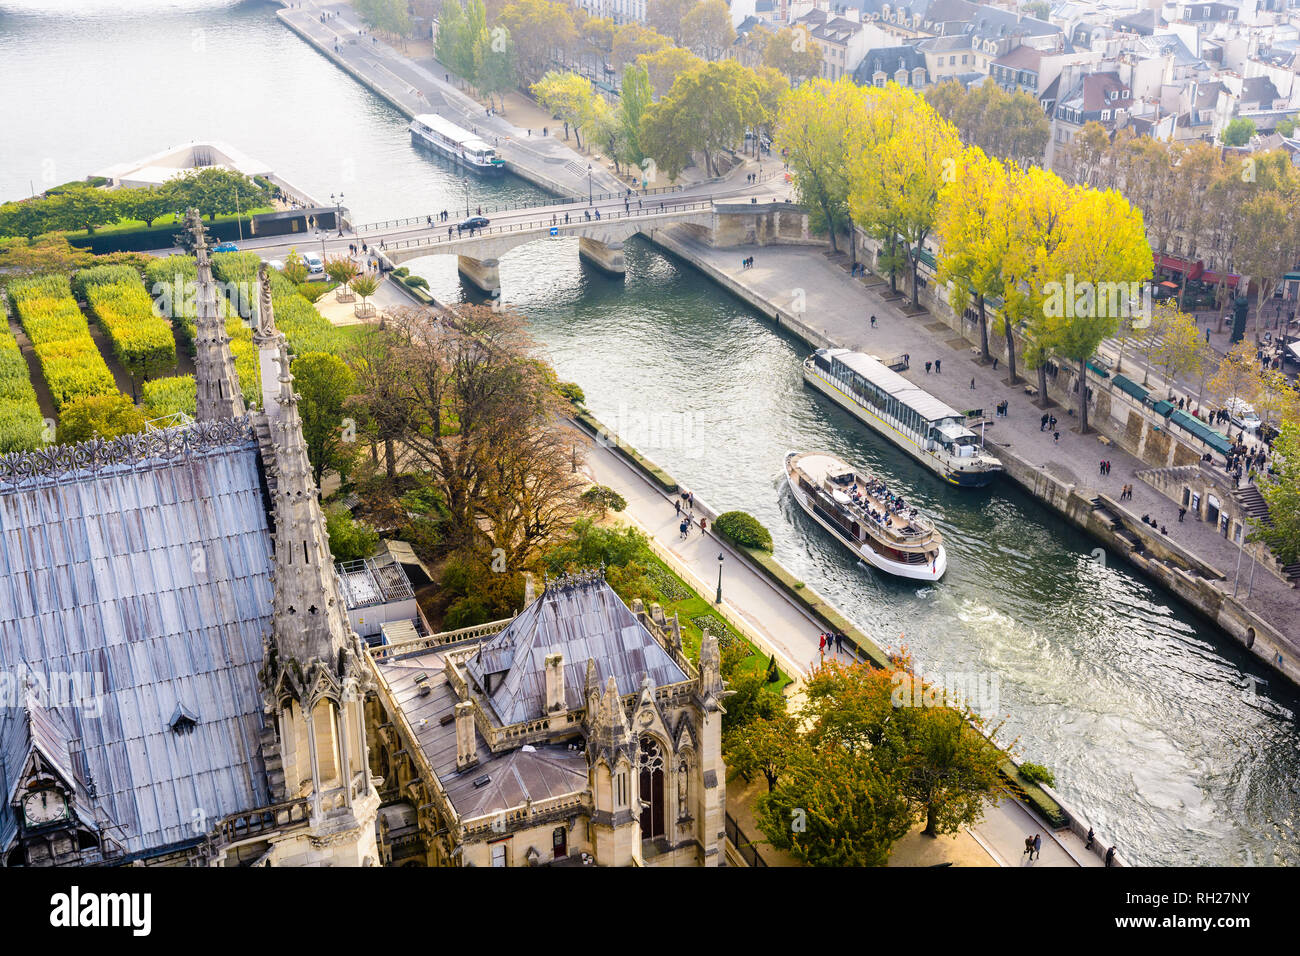 Aerial view from the tower of Notre-Dame de Paris cathedral over the river Seine with tour boats cruising and people strolling on the wharfs. Stock Photo